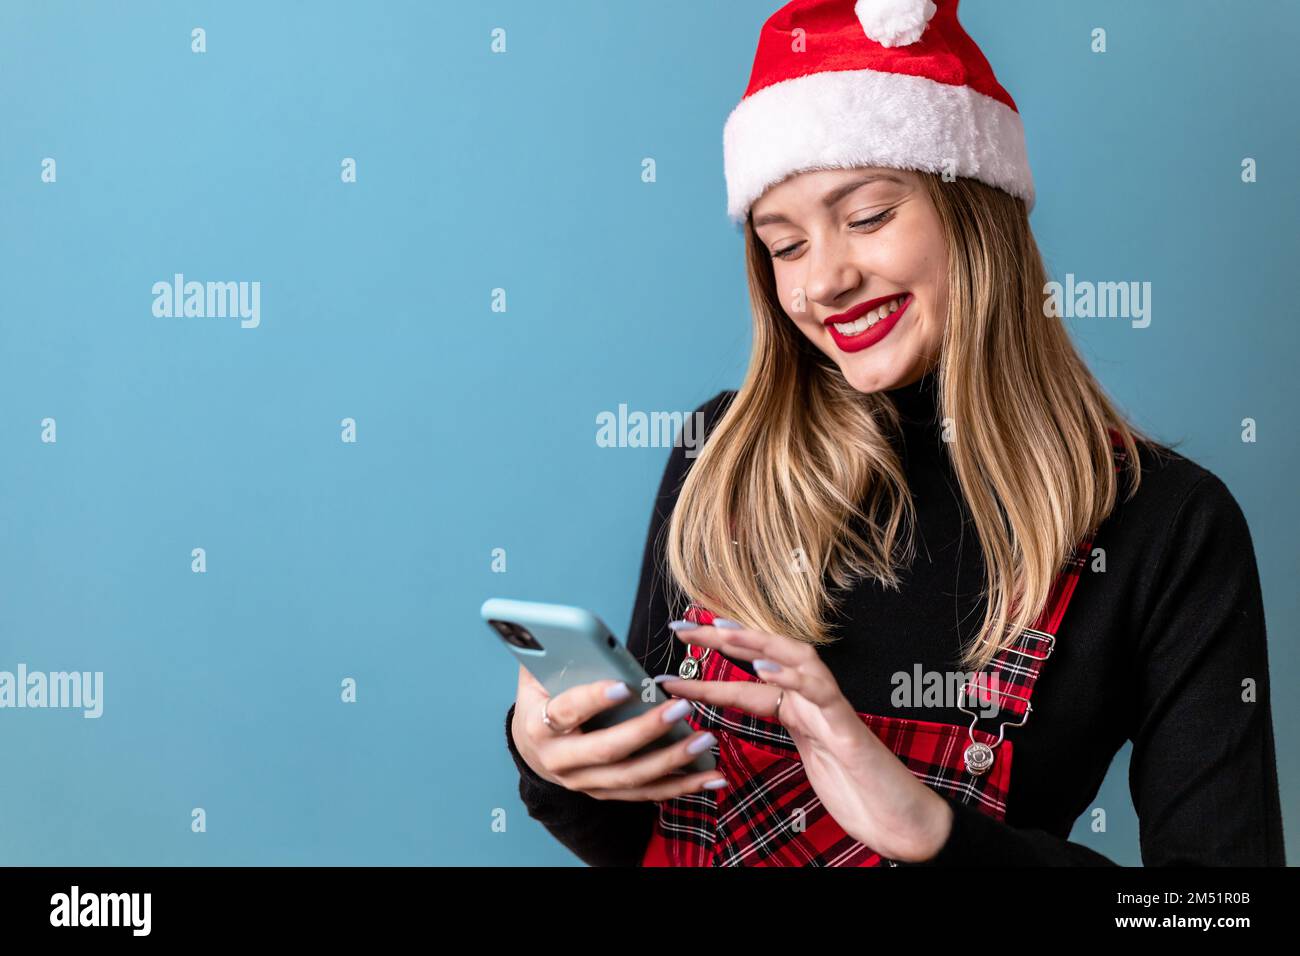 Young, blonde girl with Santa hat looking at her phone Stock Photo